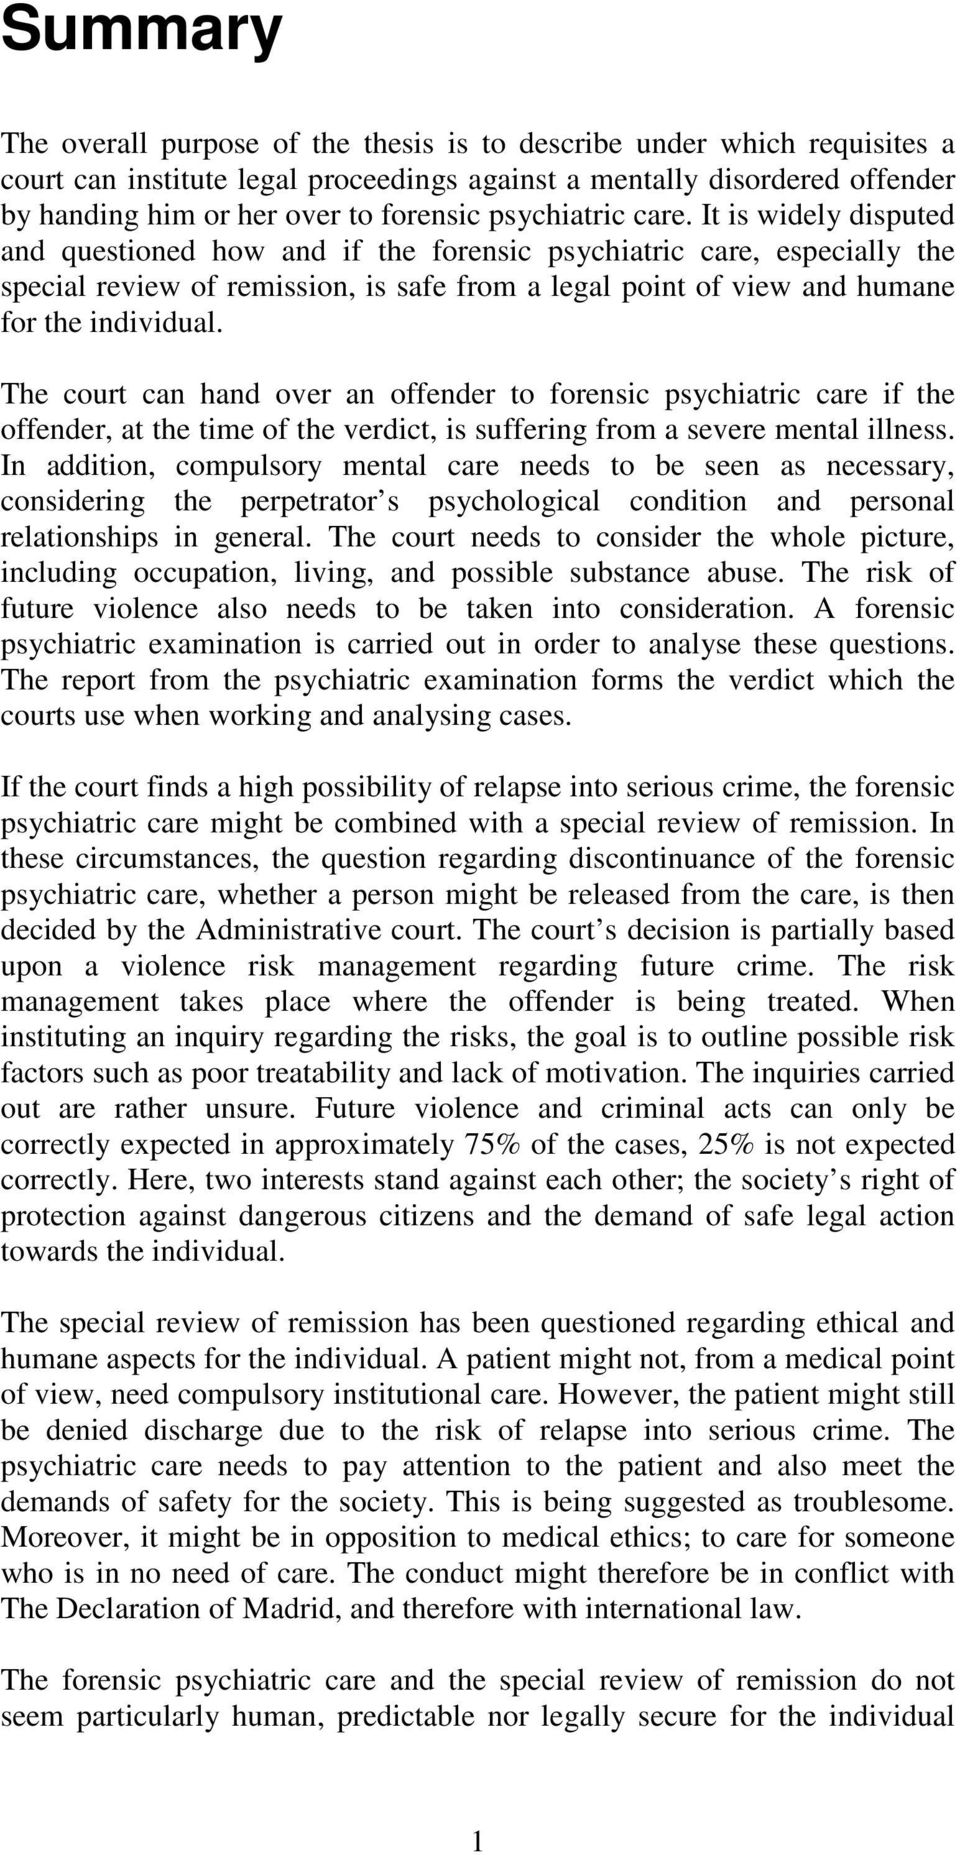 It is widely disputed and questioned how and if the forensic psychiatric care, especially the special review of remission, is safe from a legal point of view and humane for the individual.